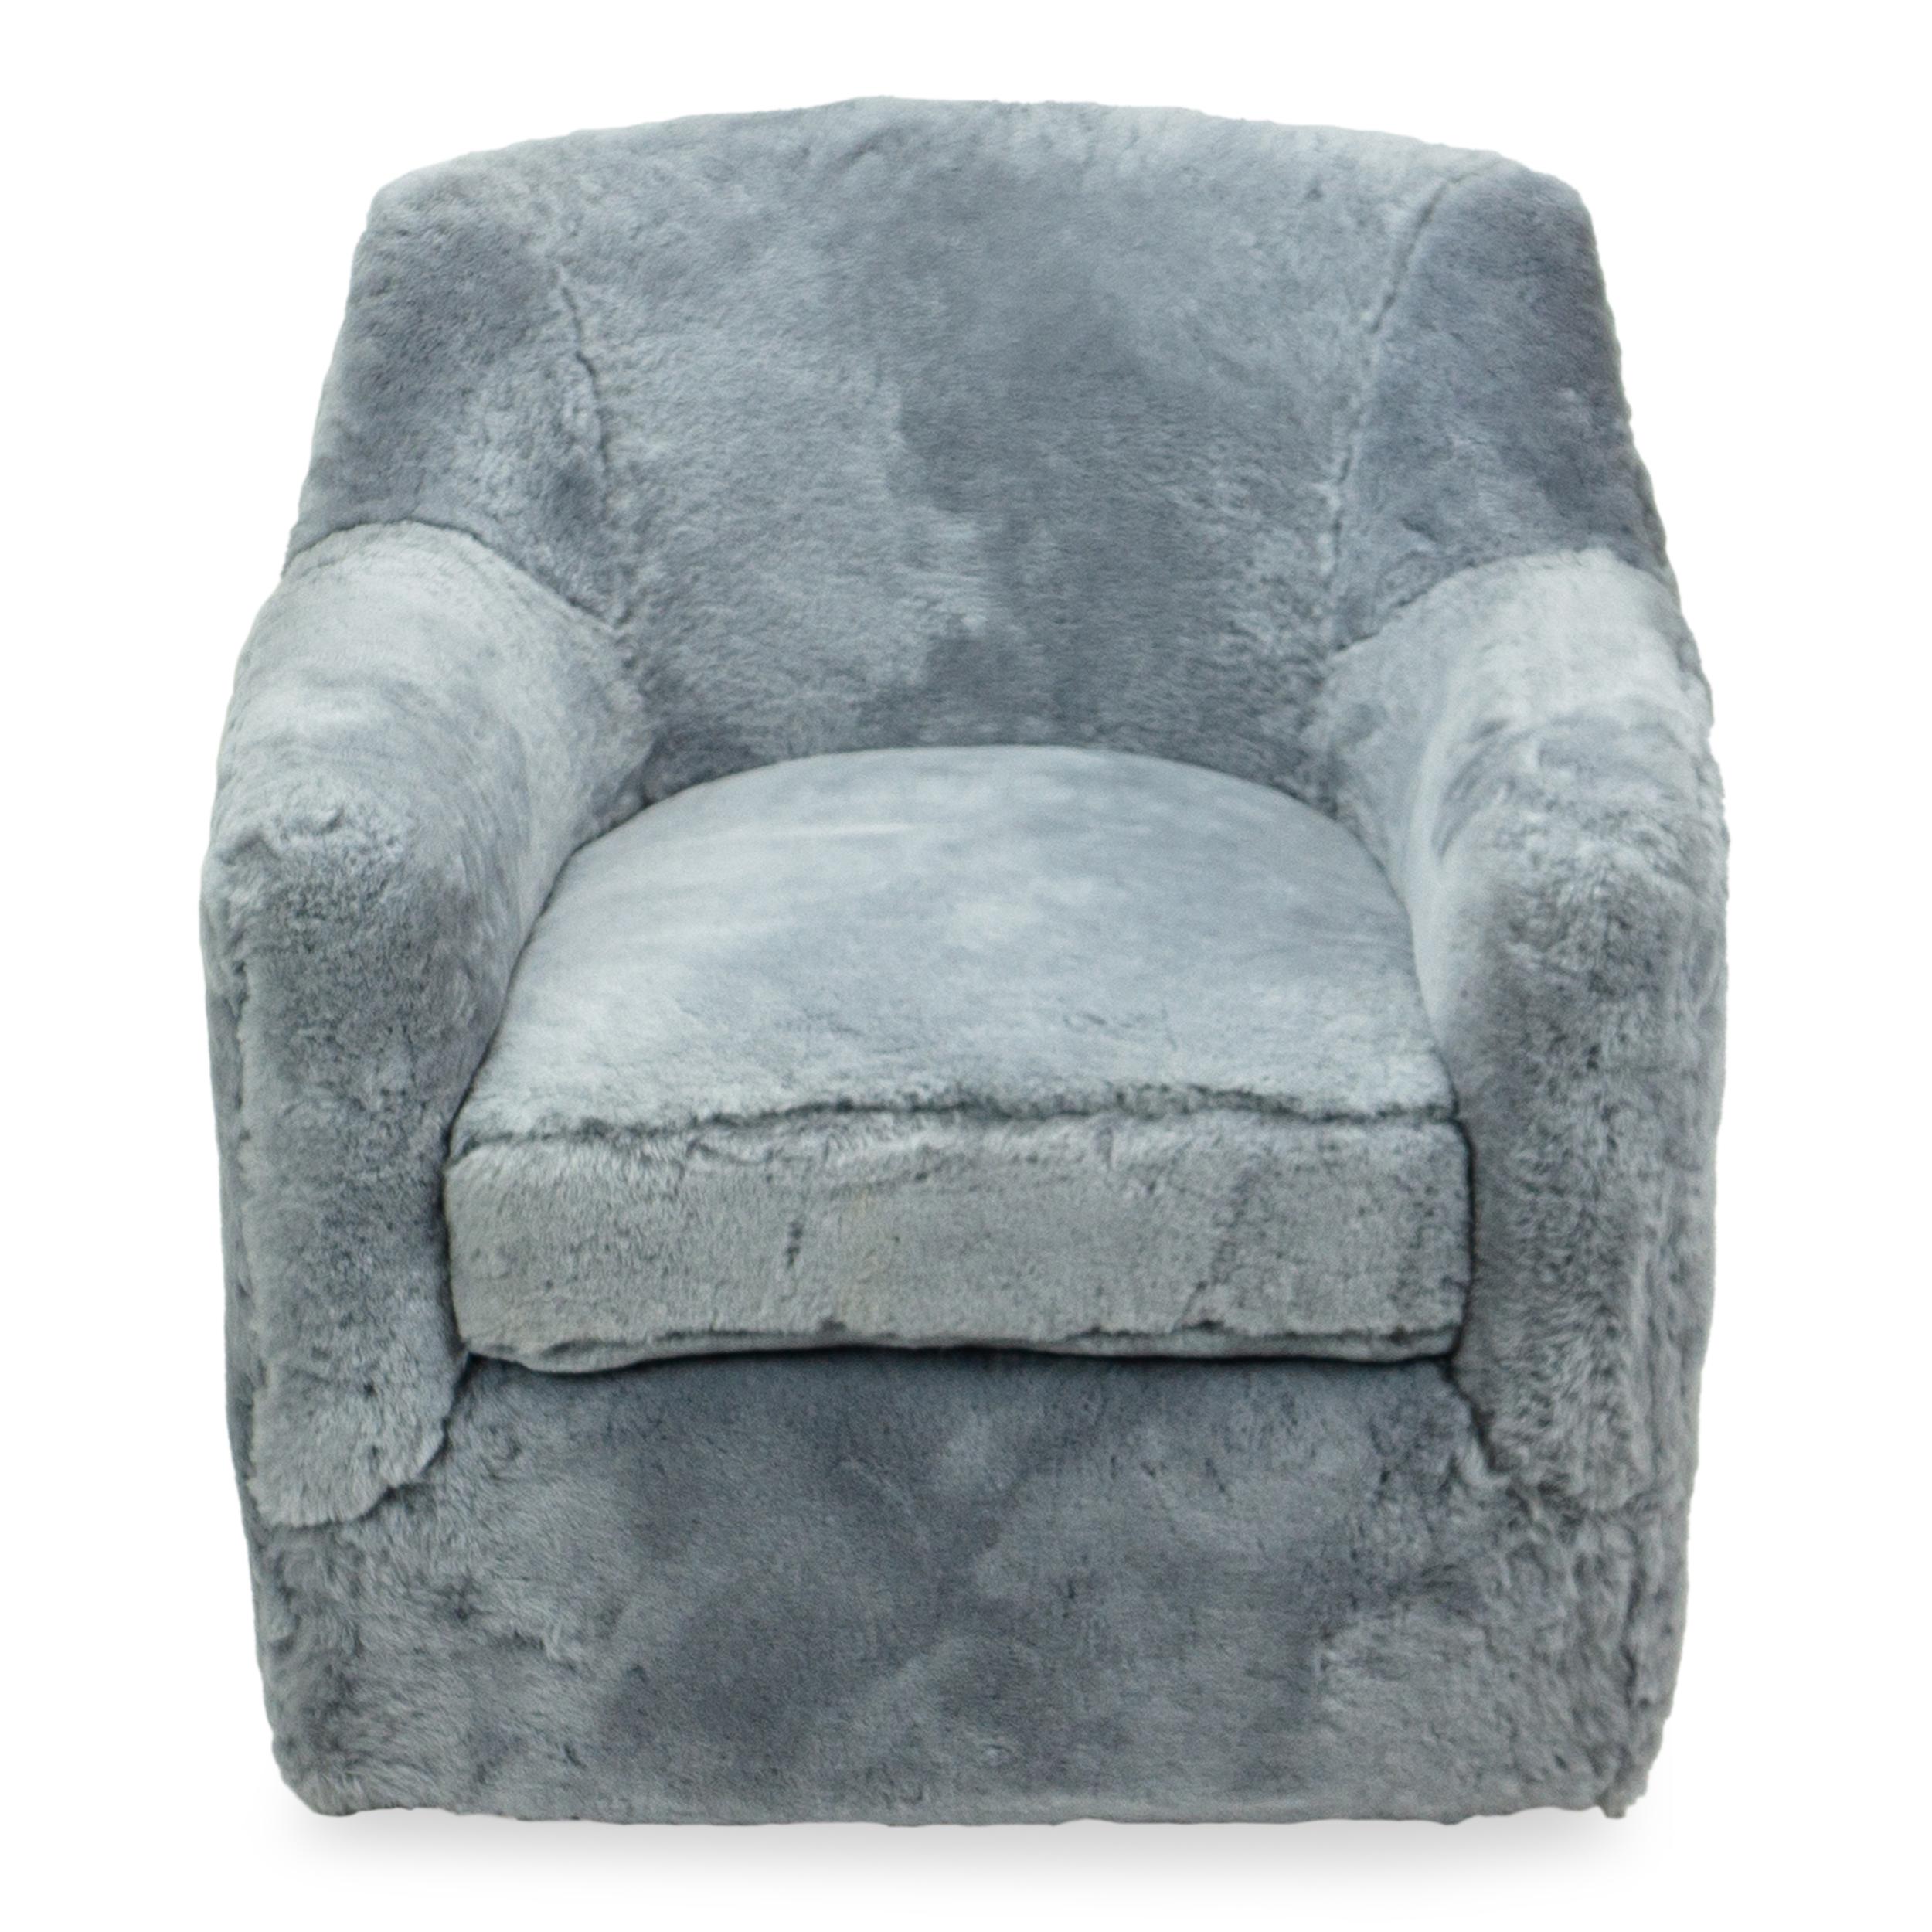 Sheepskin Contemporary Swivel Chair in Blue Gray Shearling For Sale